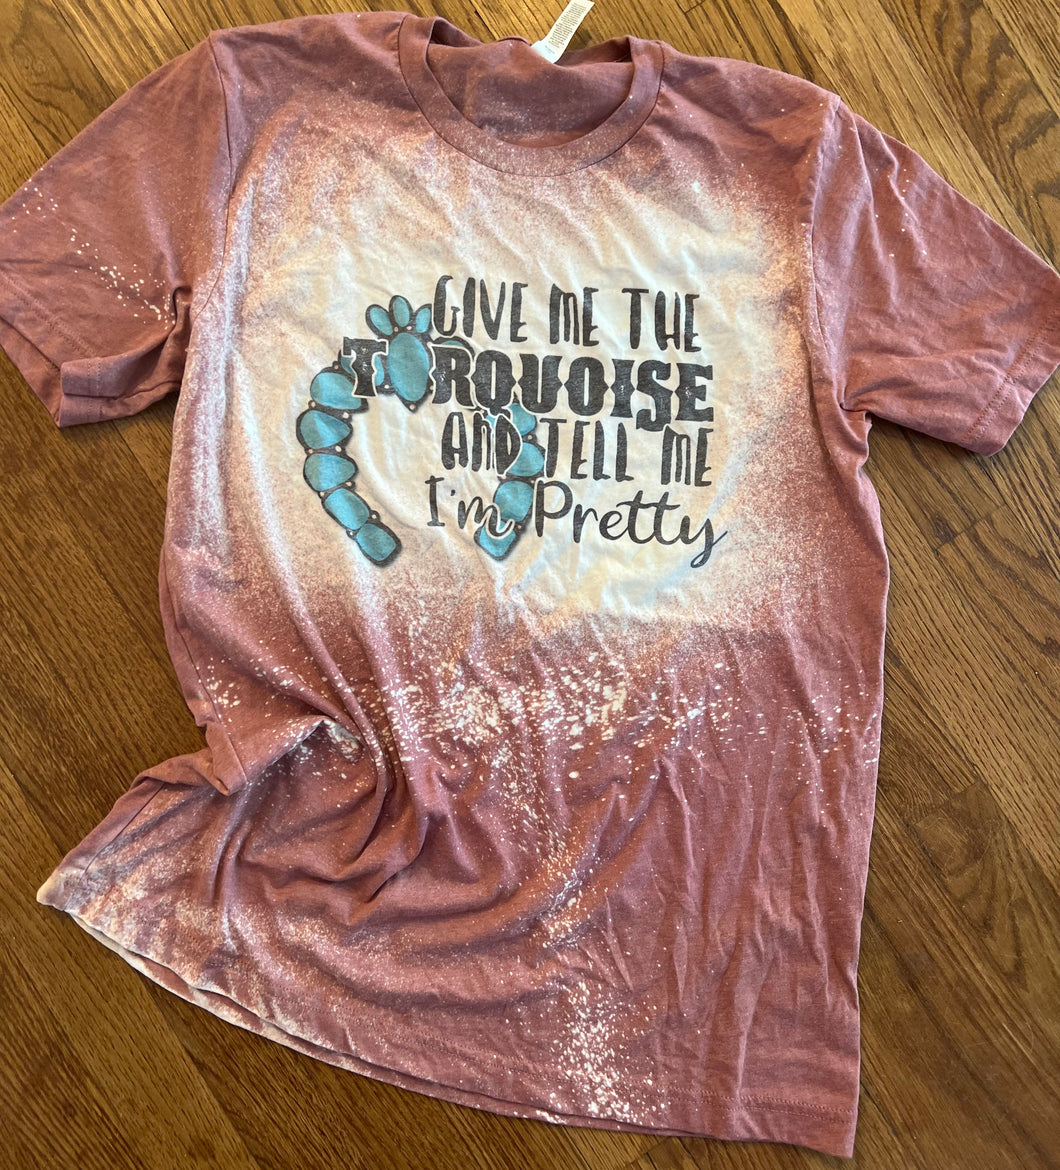 Give me the turquoise and tell me I’m pretty bleached graphic tee - Mavictoria Designs Hot Press Express